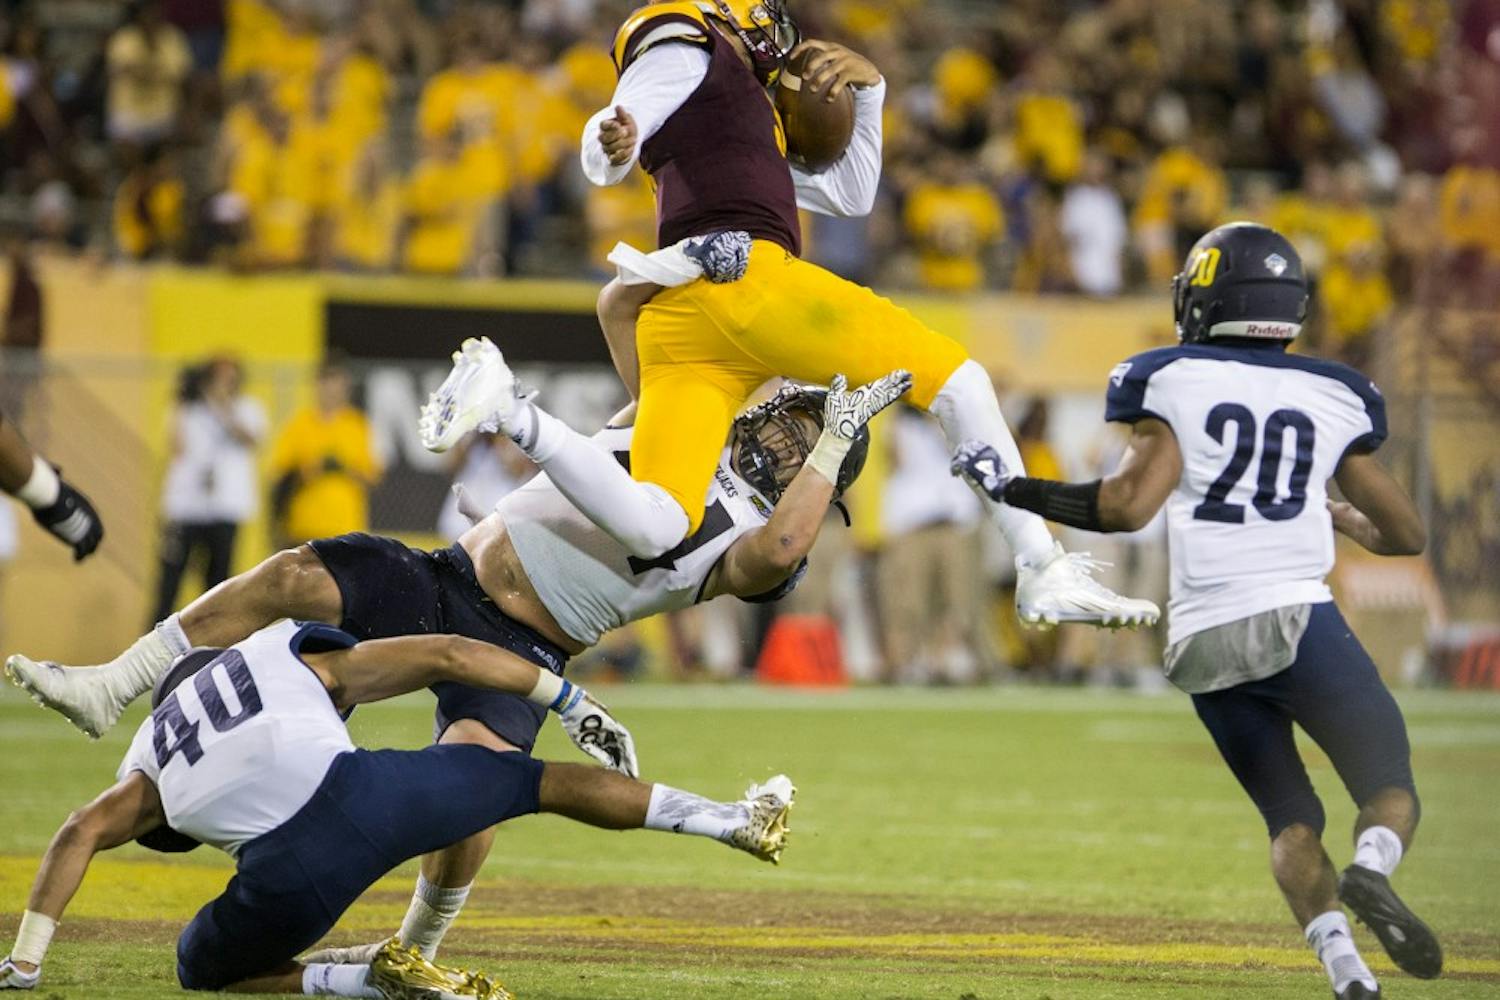 ASU redshirt sophomore quarterback Manny Wilkins (5) hops over defenders during a game against Northern Arizona University in Tempe, Arizona, on Sept. 3, 2016. The Sun Devils won the matchup, 44-13.